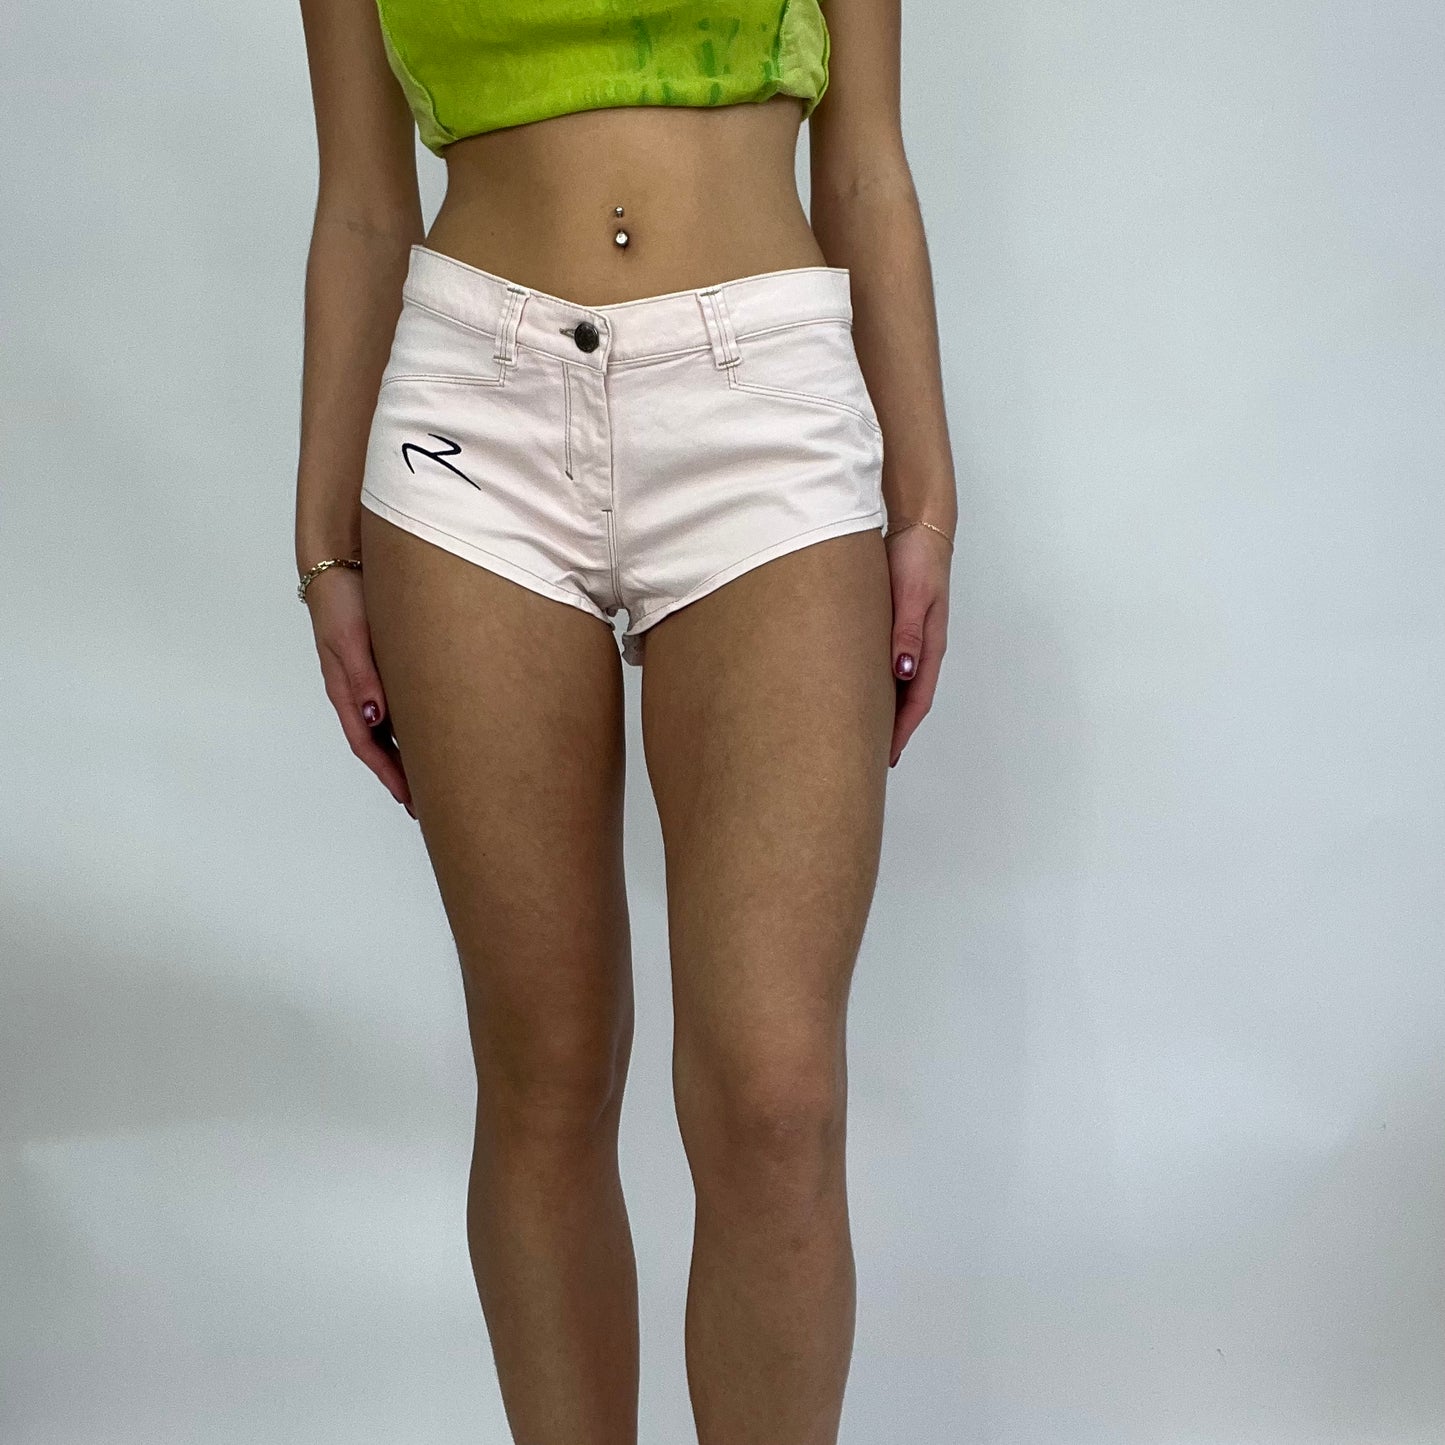 SUMMER ‘IT GIRL’ DROP | baby pink shorts - size xs